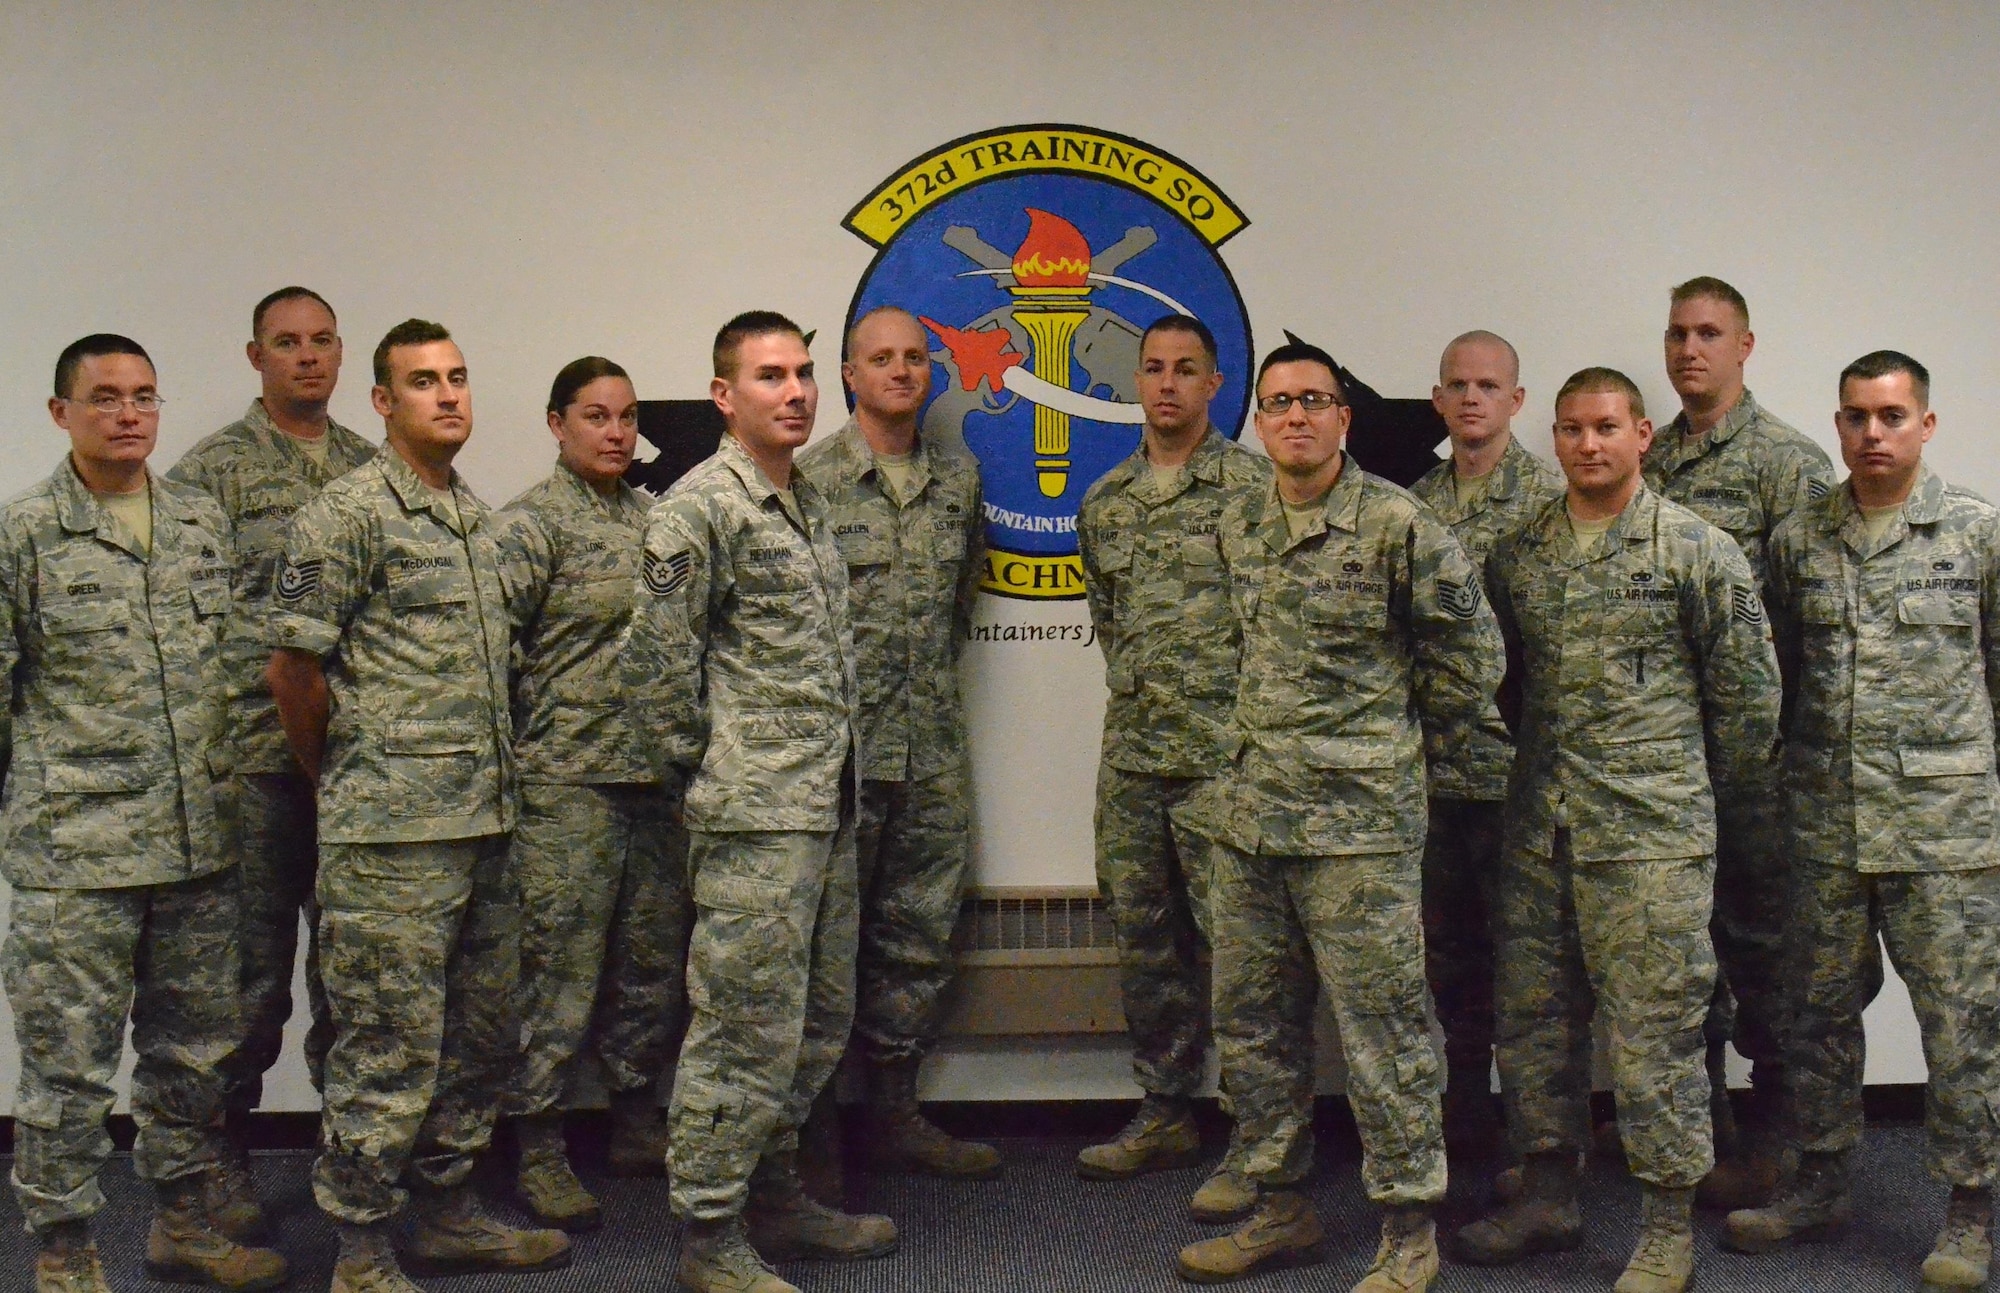 Detachment 7 is located at Mountain Home AFB, ID, home of the 366th Fighter Wing. 